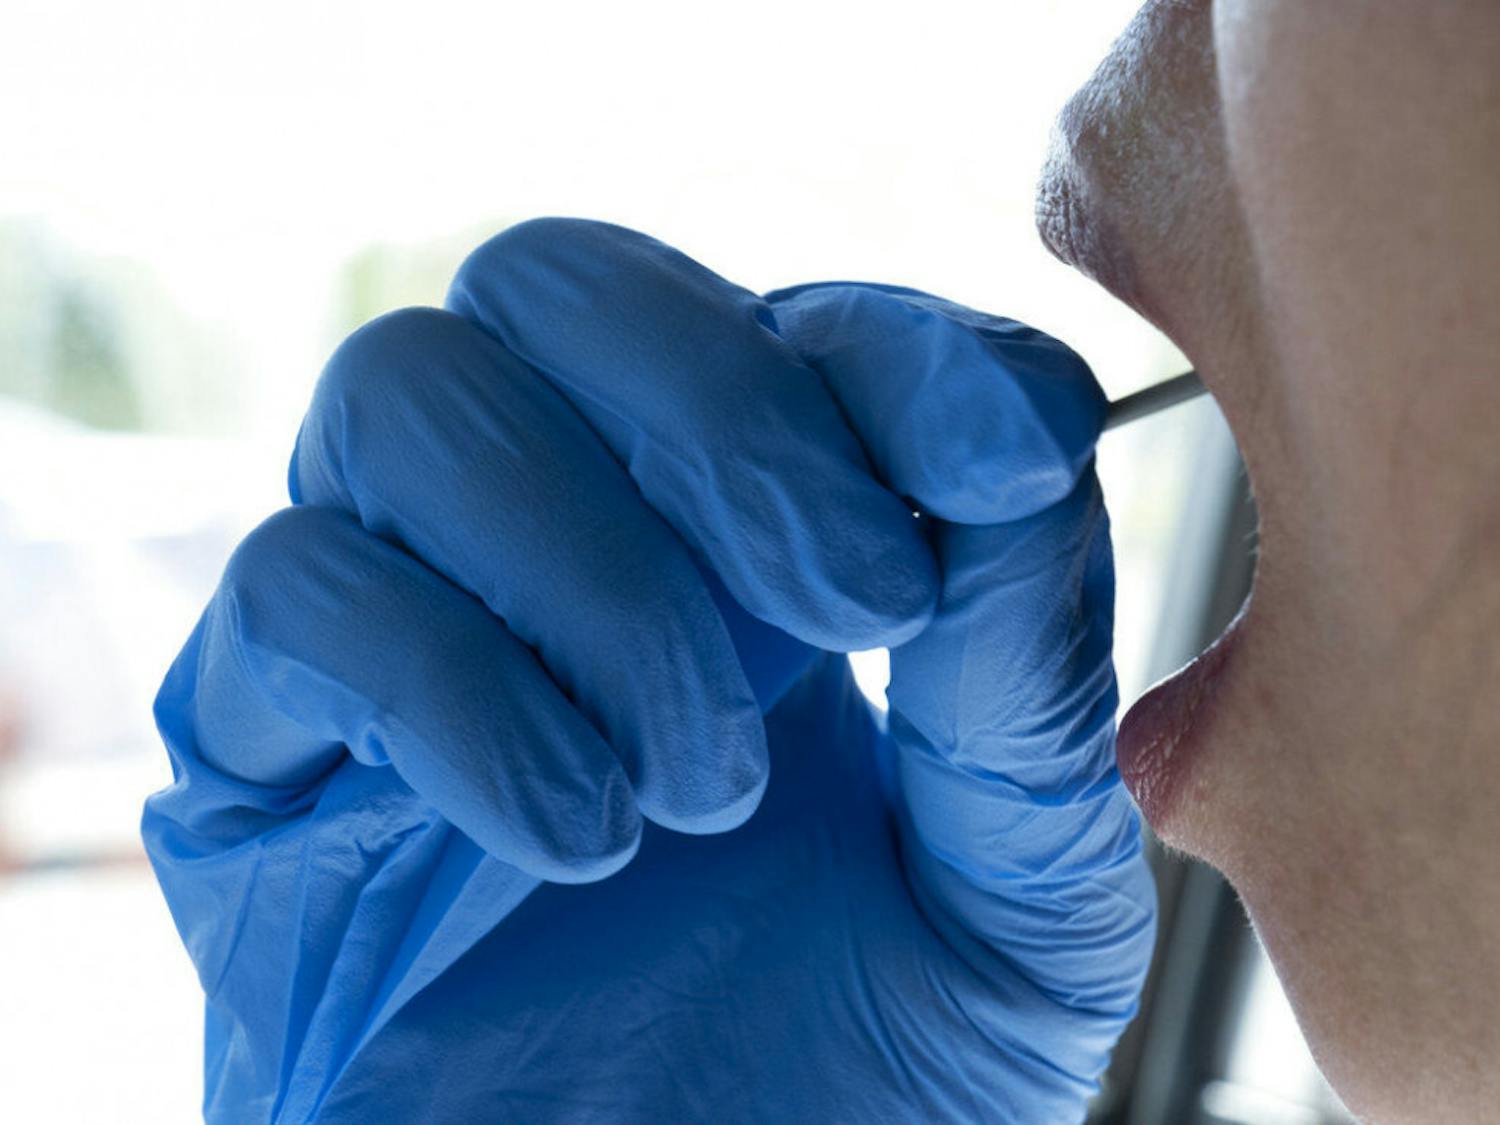 In this Wednesday, May 6, 2020 photo a woman swabs the inside of her mouth during a self administered coronavirus test at a drive through testing site in a parking lot in the Woodland Hills section of Los Angeles. The city of Los Angeles is providing free coronavirus tests to anyone who wants one regardless of whether they have symptoms. The offer reflects a parting with state guidelines after the mayor partnered with a startup testing company. The test the city is offering is easier to administer and doesn't require the scarce supplies that have created bottlenecks for expanded testing across California. (AP Photo/Richard Vogel)